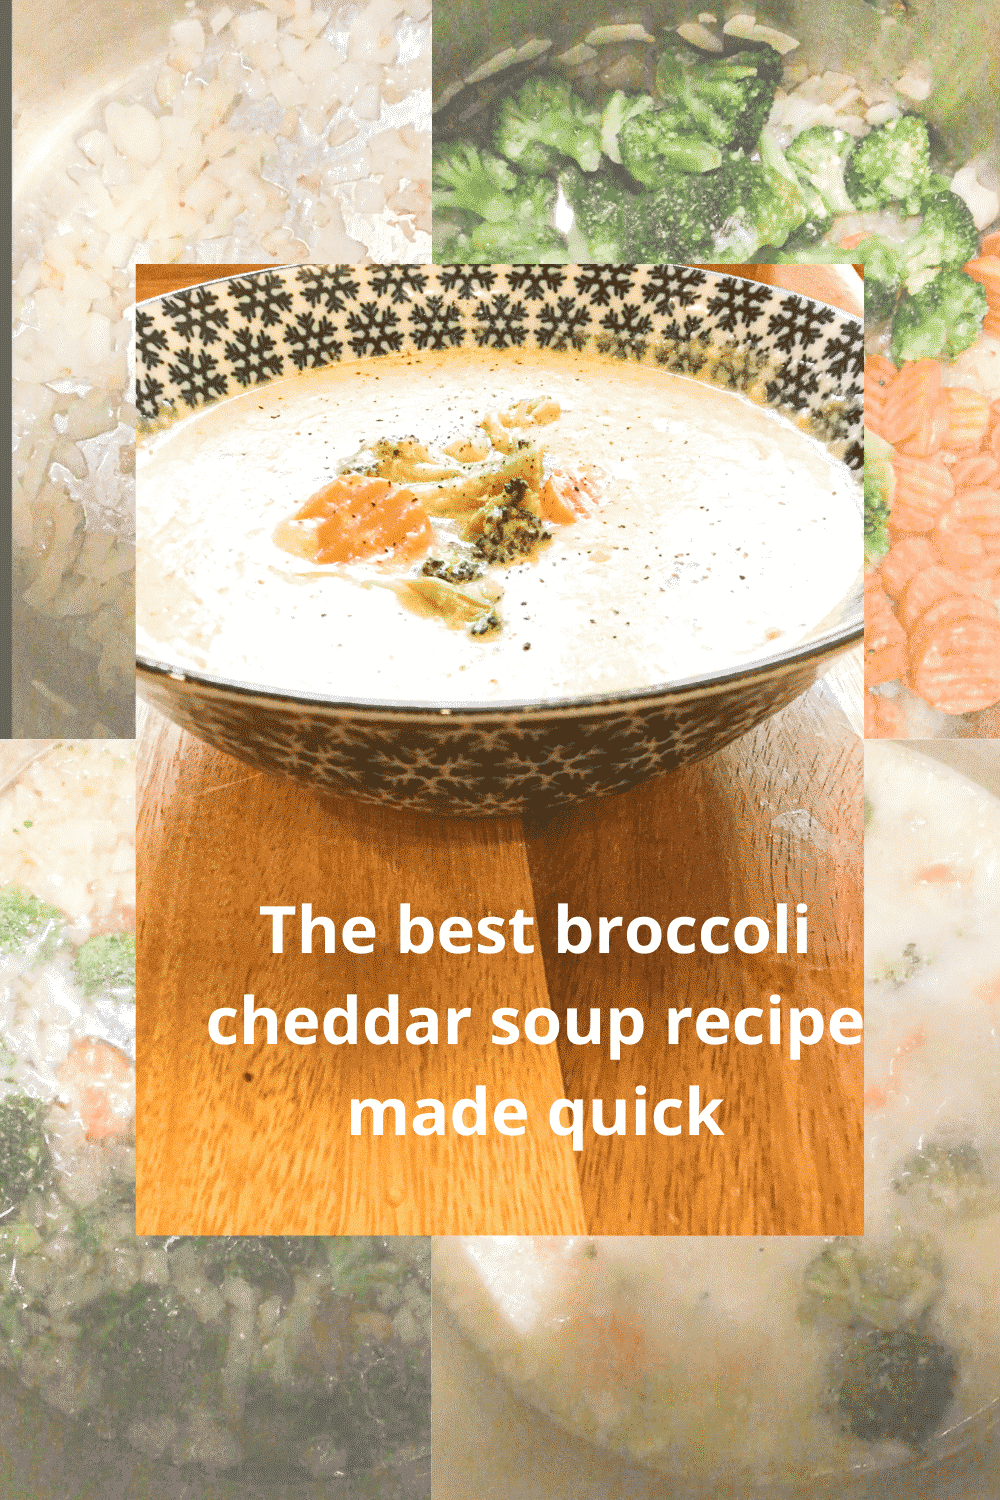 Delicious nutritious food, the best broccoli cheddar soup recipe made quick #healthysoup #30minutesmeal #broccolicheddarsoup #creamsoup #easysouprecipes #soupdinner #veggiessoup #vegetablessoup #yummiesoup #simple #easy #fromscratch #homemade #soup #comfortmeal #foodie #deliciousnutritiousfoods #whole30 #cheese #happyfamily #copycatpanerabread’sbroccolicheddarsoup #panerabread #soup #cheeserecipes #cheesedish #cheeserecipeseasy #healthy #simple #fromscratch #delicious #nutritious #recipesilove
#bestbroccolicheddarsoup #heartybroccolicheddarsoup